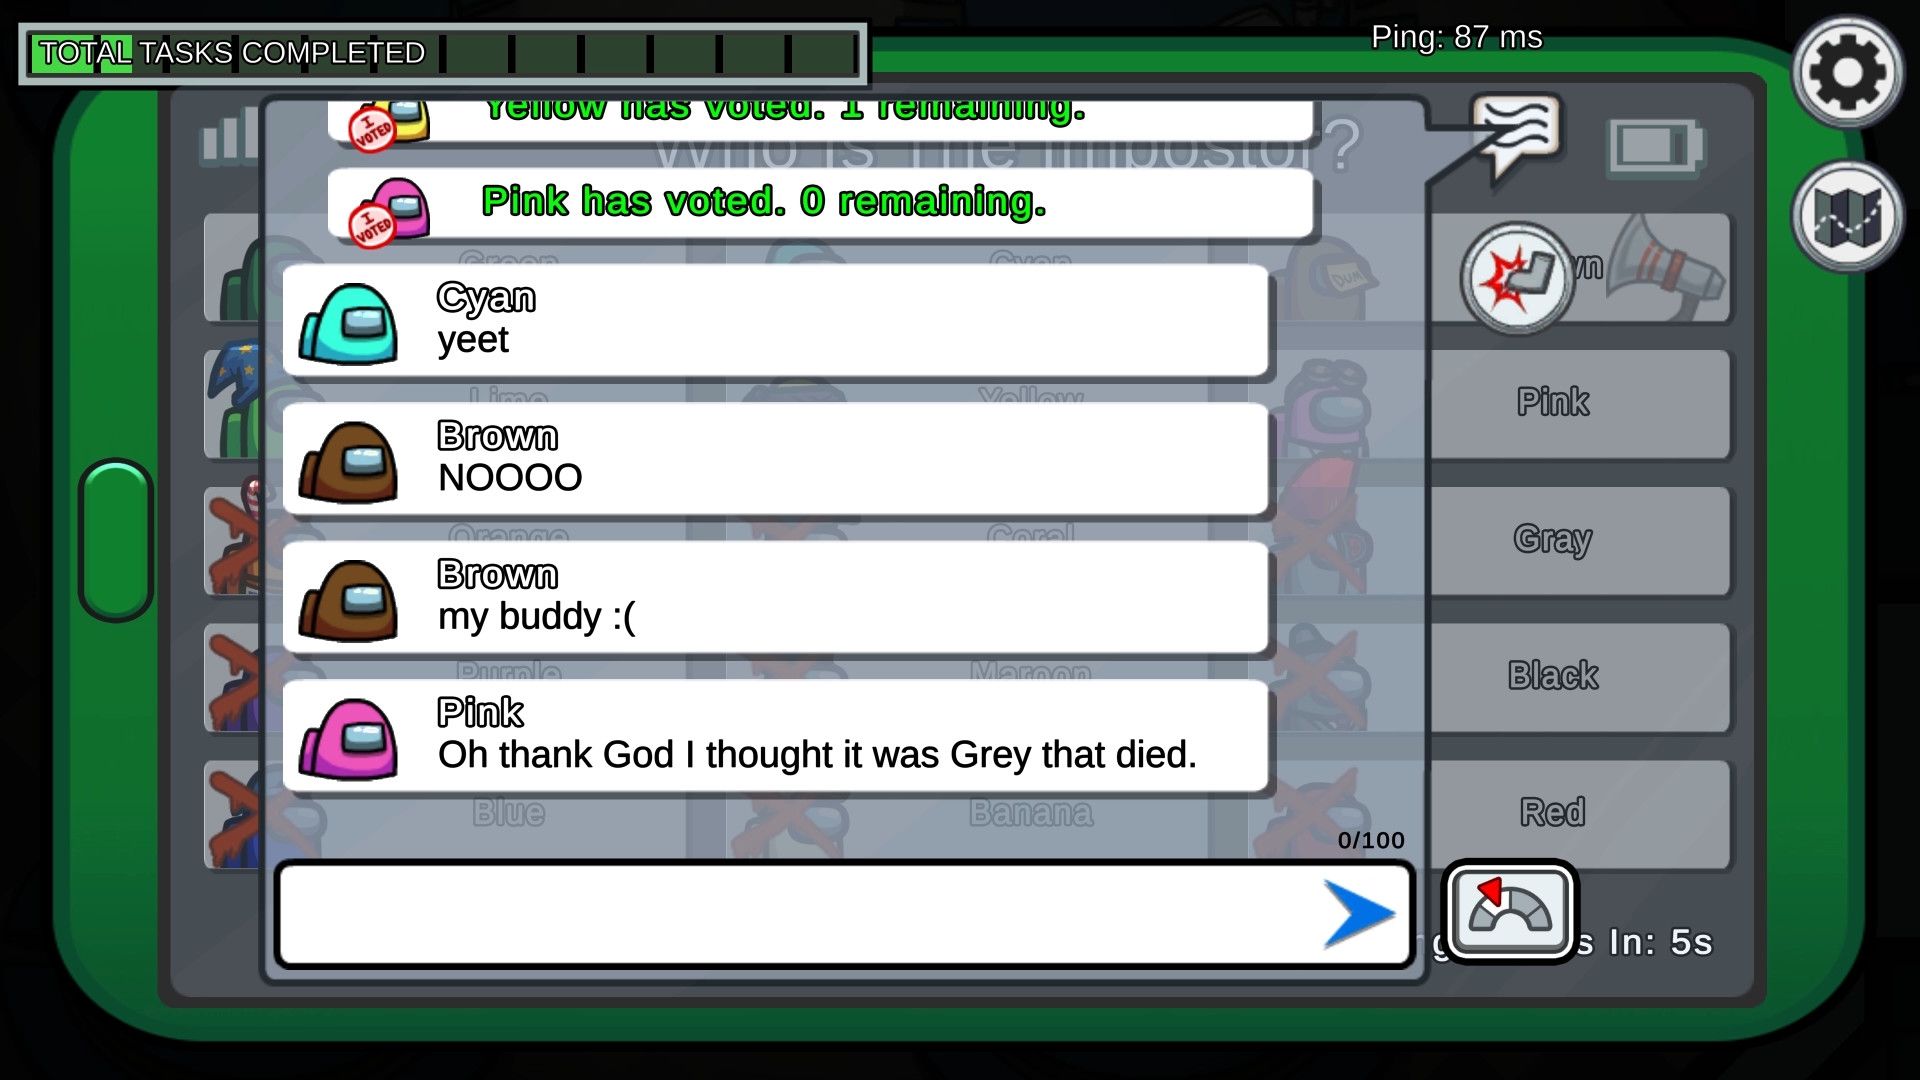 Screenshot of chatroom where players are chatting about voting someone out of the game